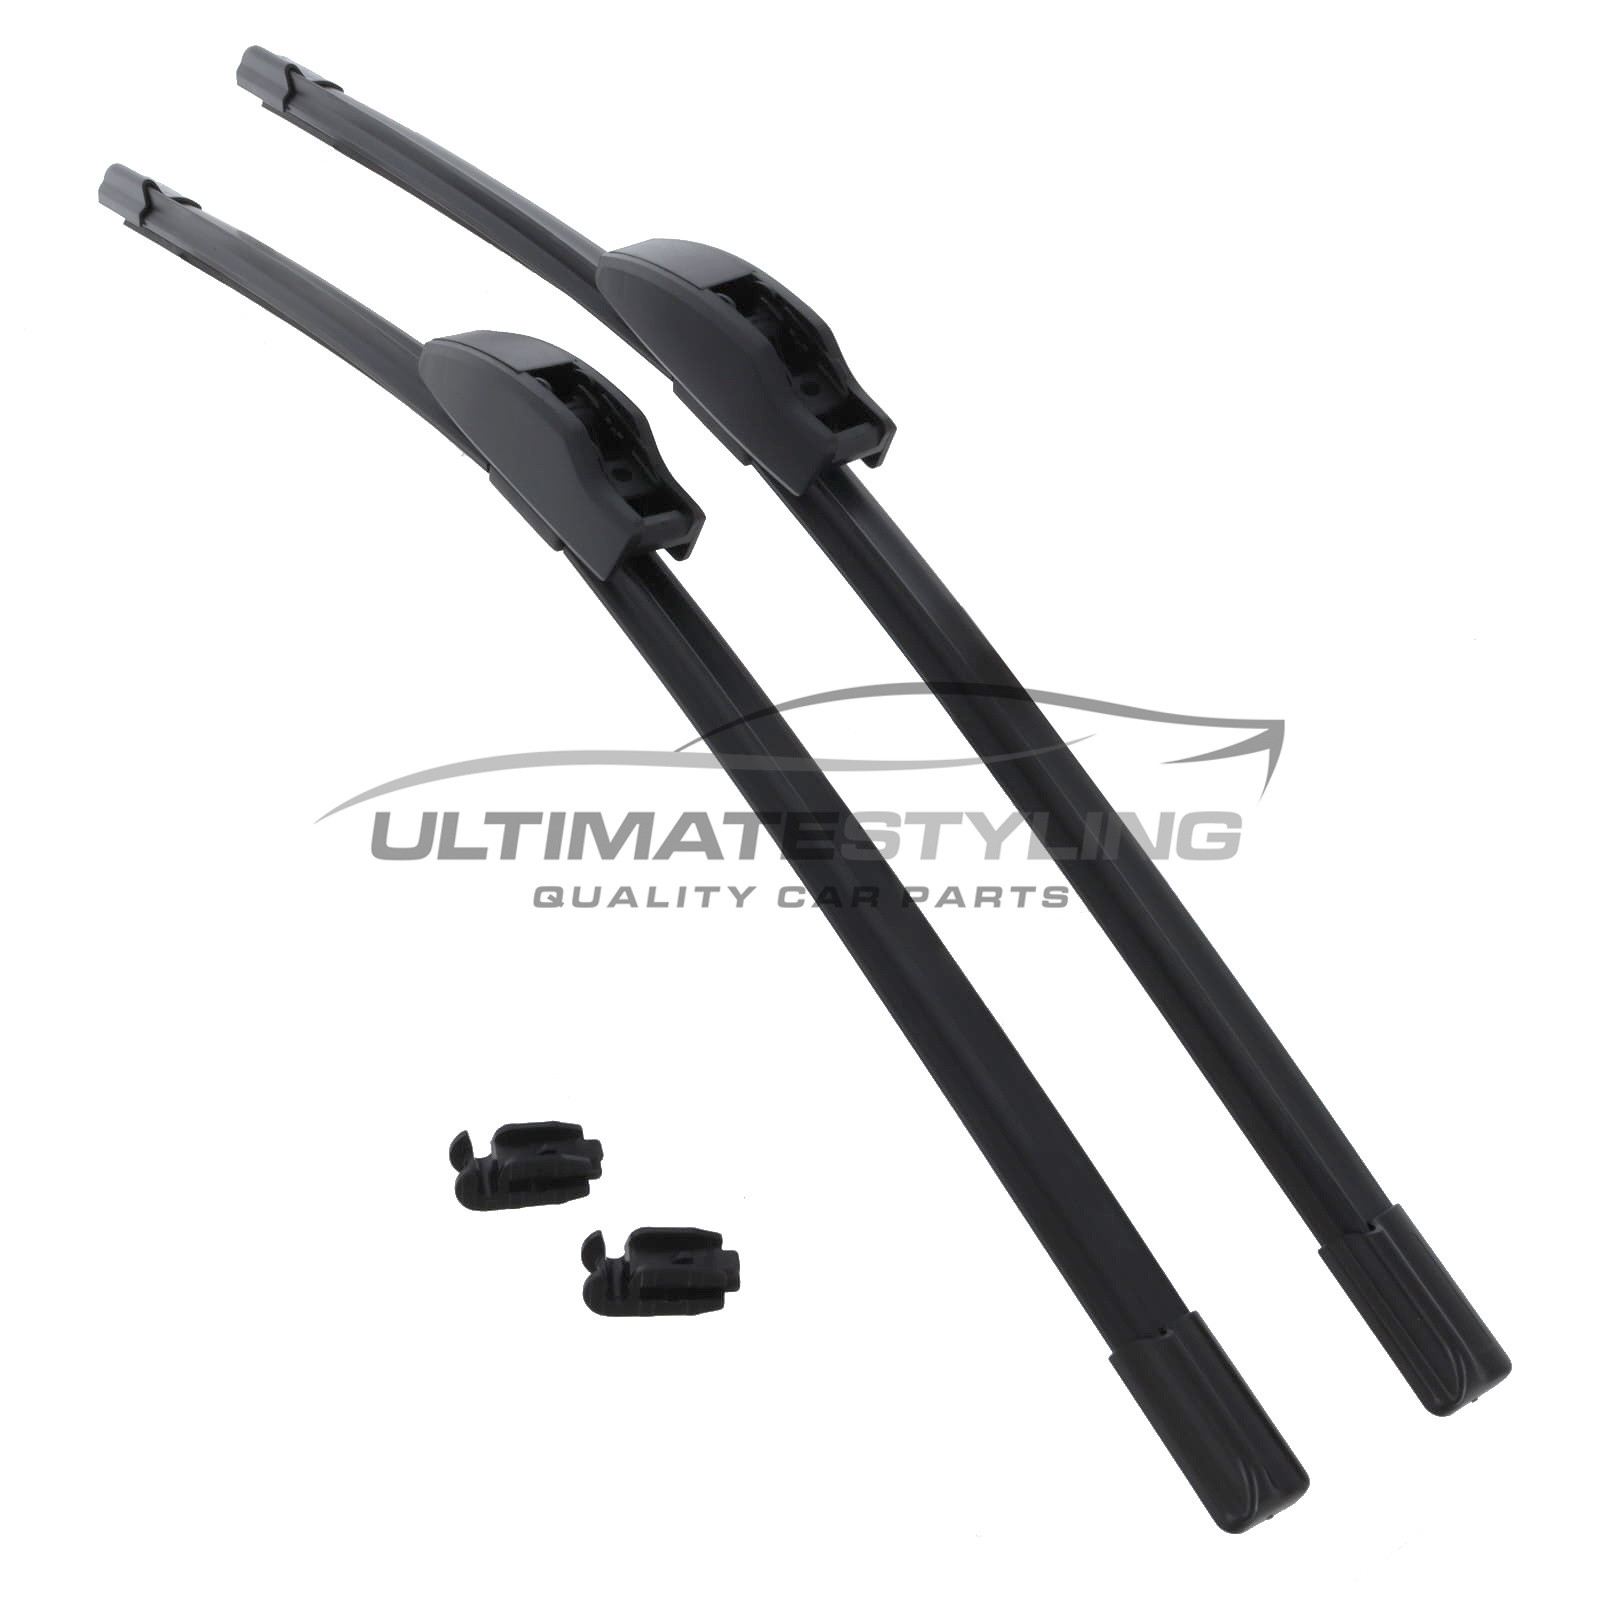 Drivers Side & Passenger Side (Front) Wiper Blades for Vauxhall Vectra